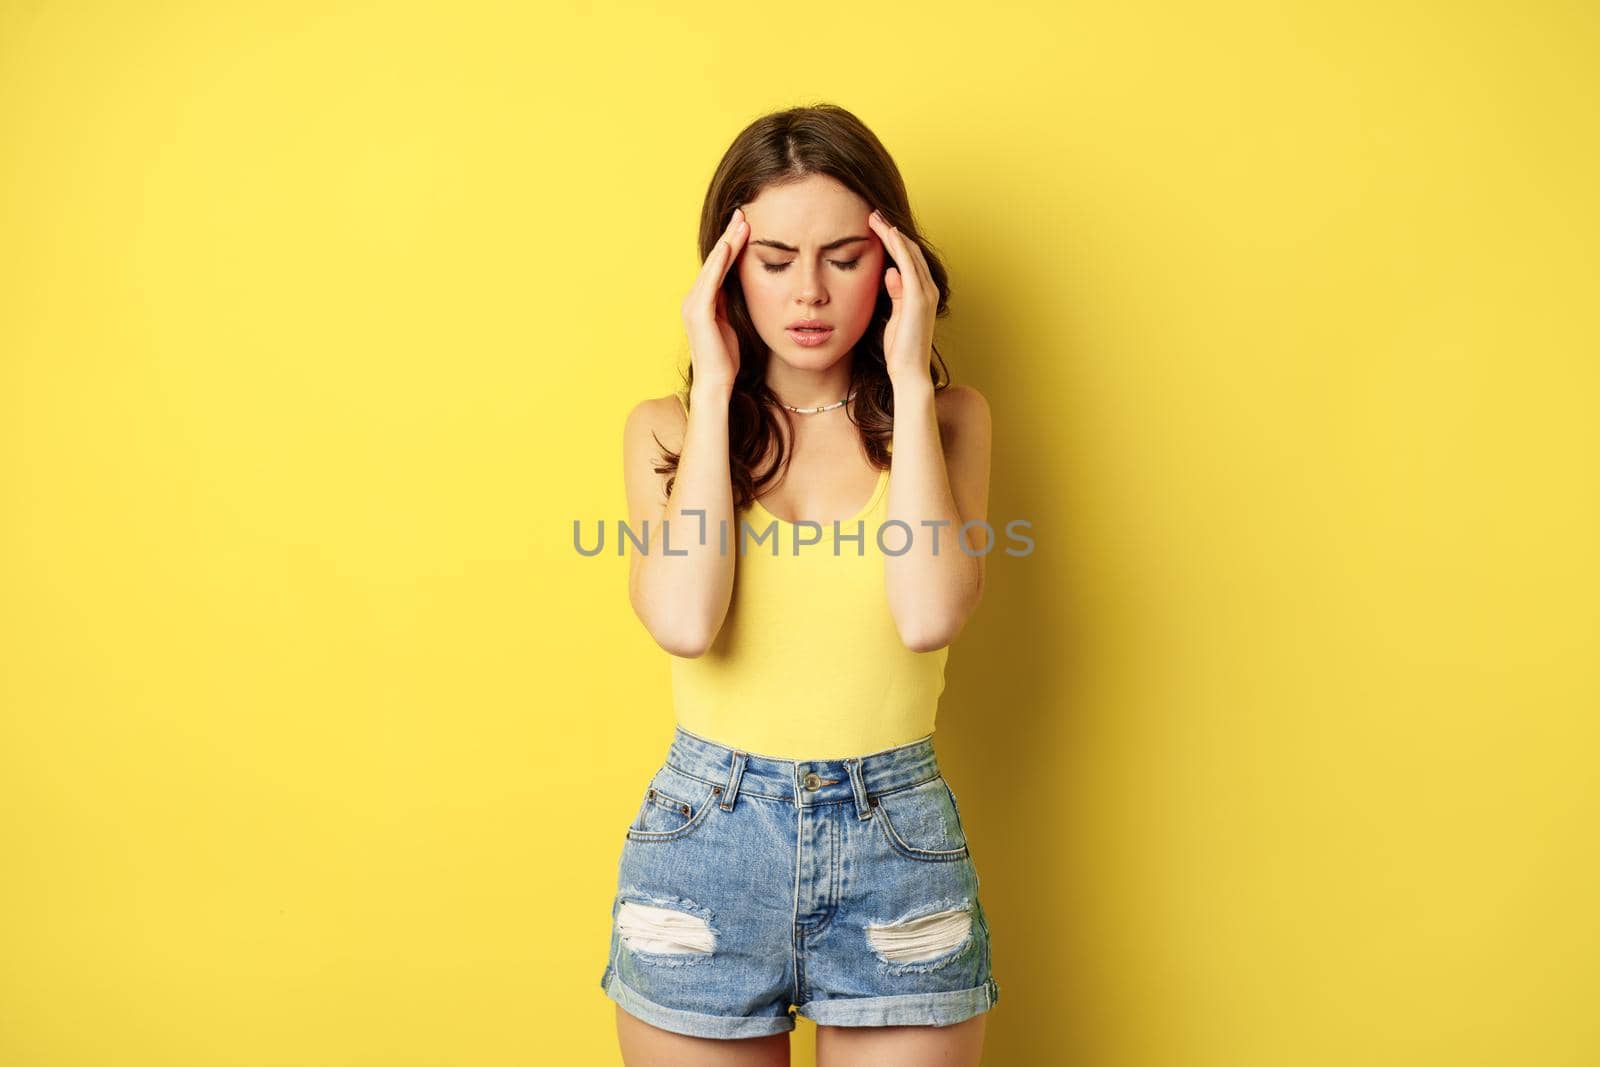 Stylish modern woman rubbing temples, having headache, migraine, frowning and grimacing from pain in head, standing against yellow background.